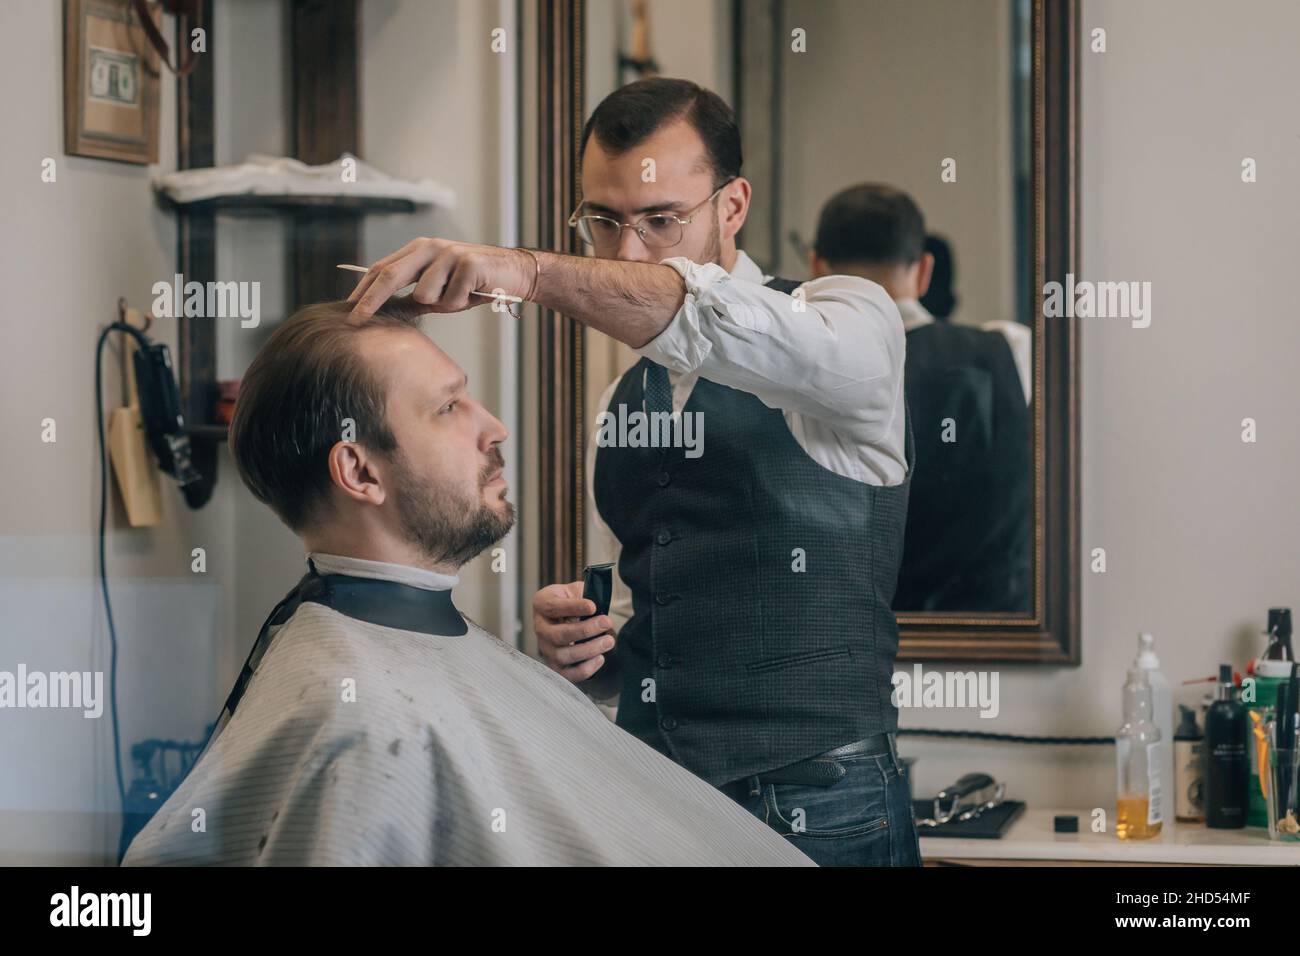 View through window, hairdresser barber cuts hair with scissors. Stock Photo